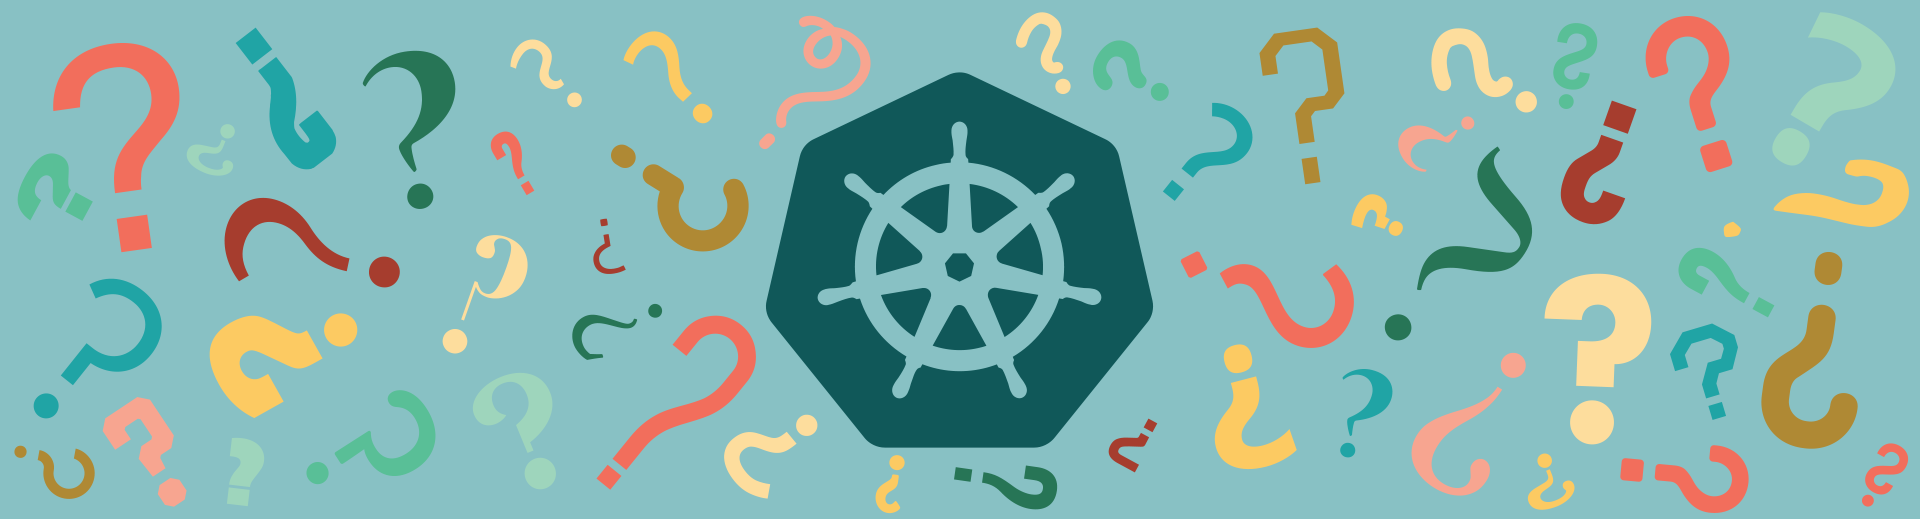 The Kubernetes logo surrounded by question marks in various fonts and colours